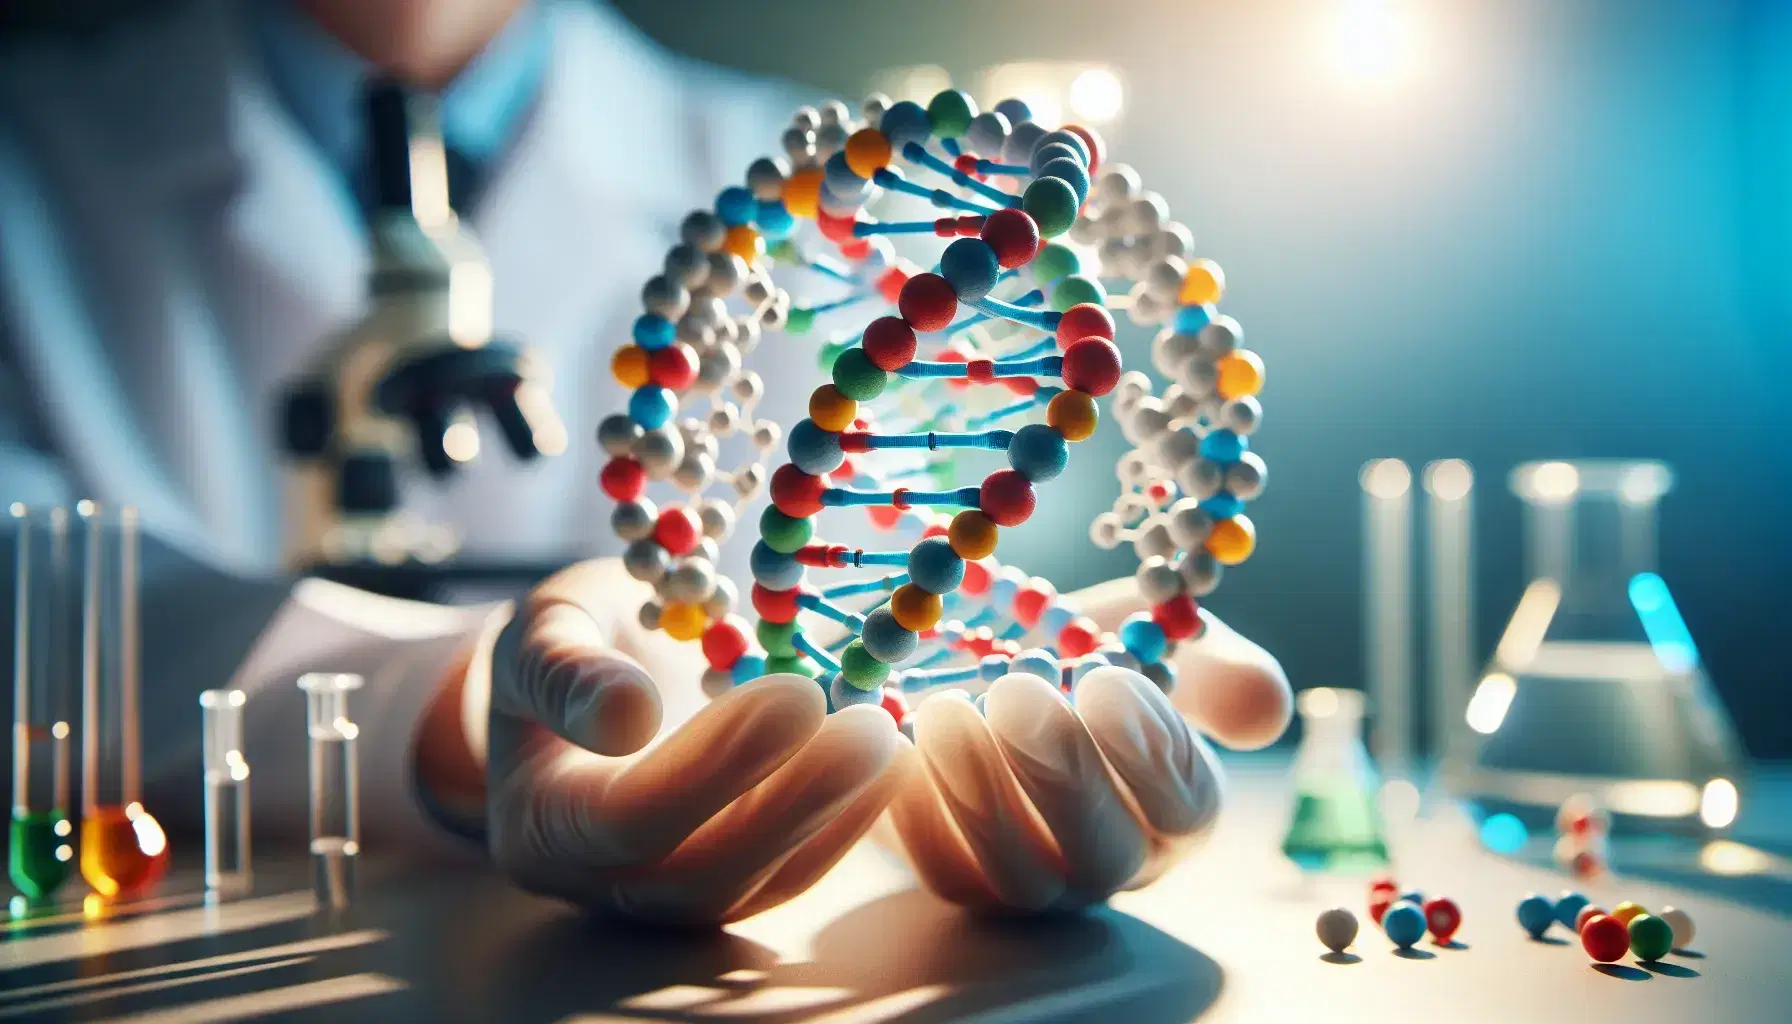 Geneticist's hands in latex gloves holding a colorful DNA model with blue, red, green, and yellow spheres in a blurred laboratory background.